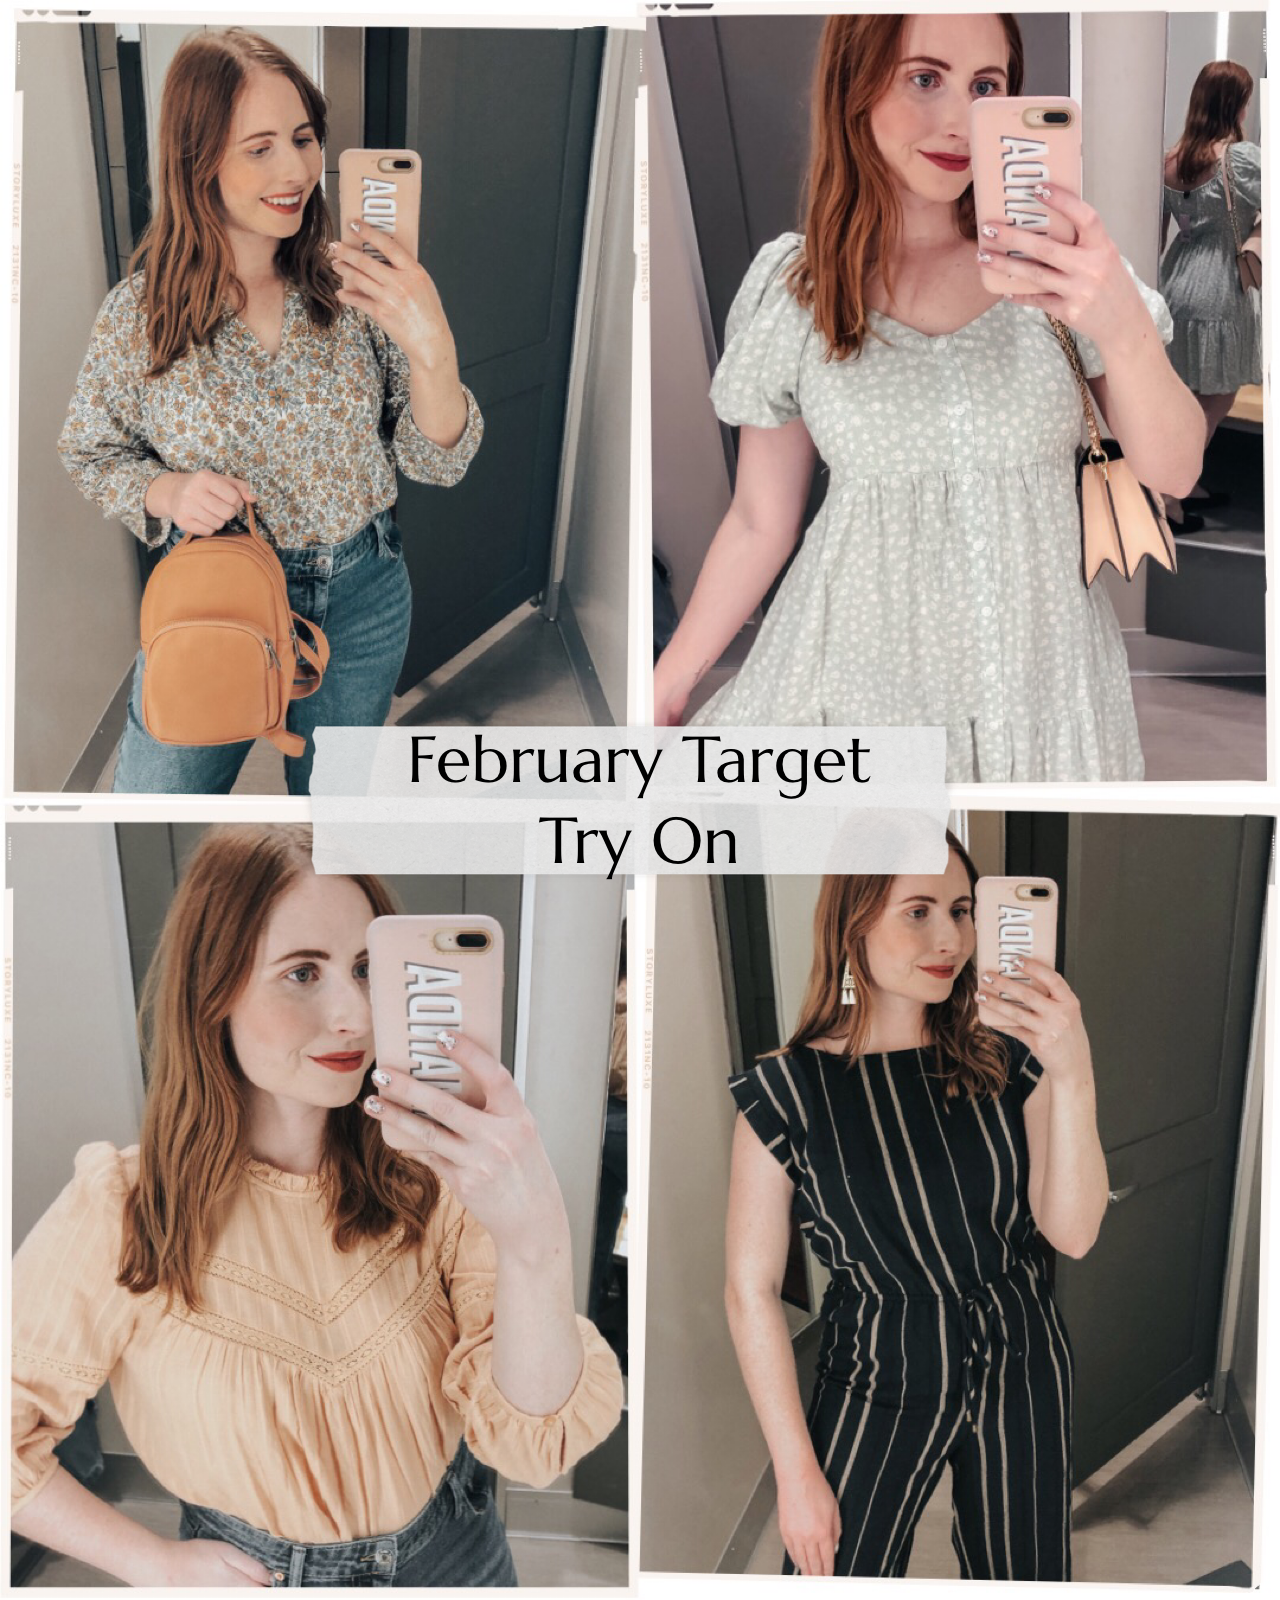 February 2020 Target Try On Haul. Affordable Fashion at Target.